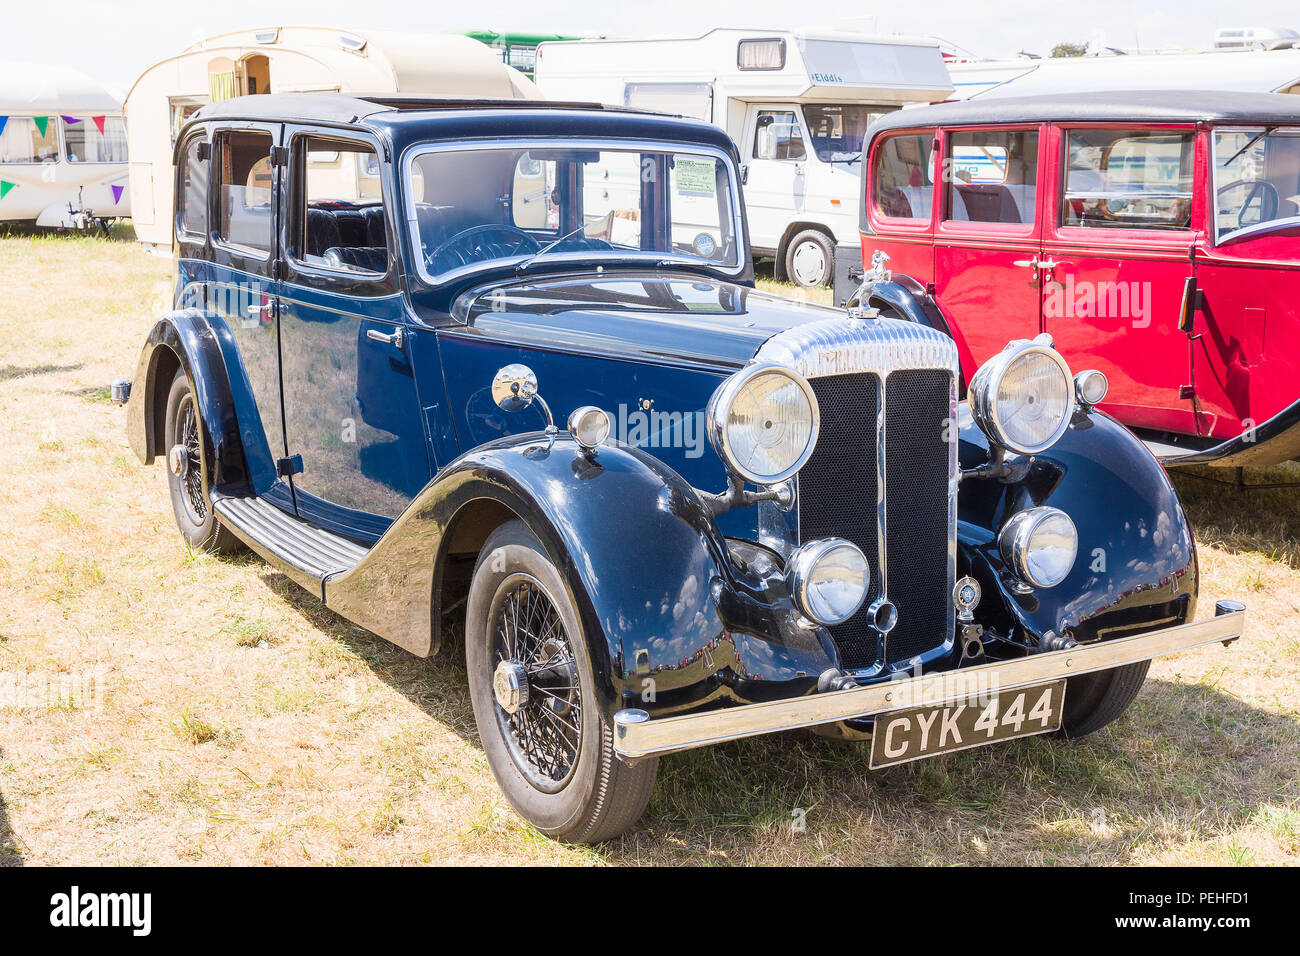 Daimler E20 limousine from the 1930s on display at South Cerney in Gloucestershire UK Stock Photo